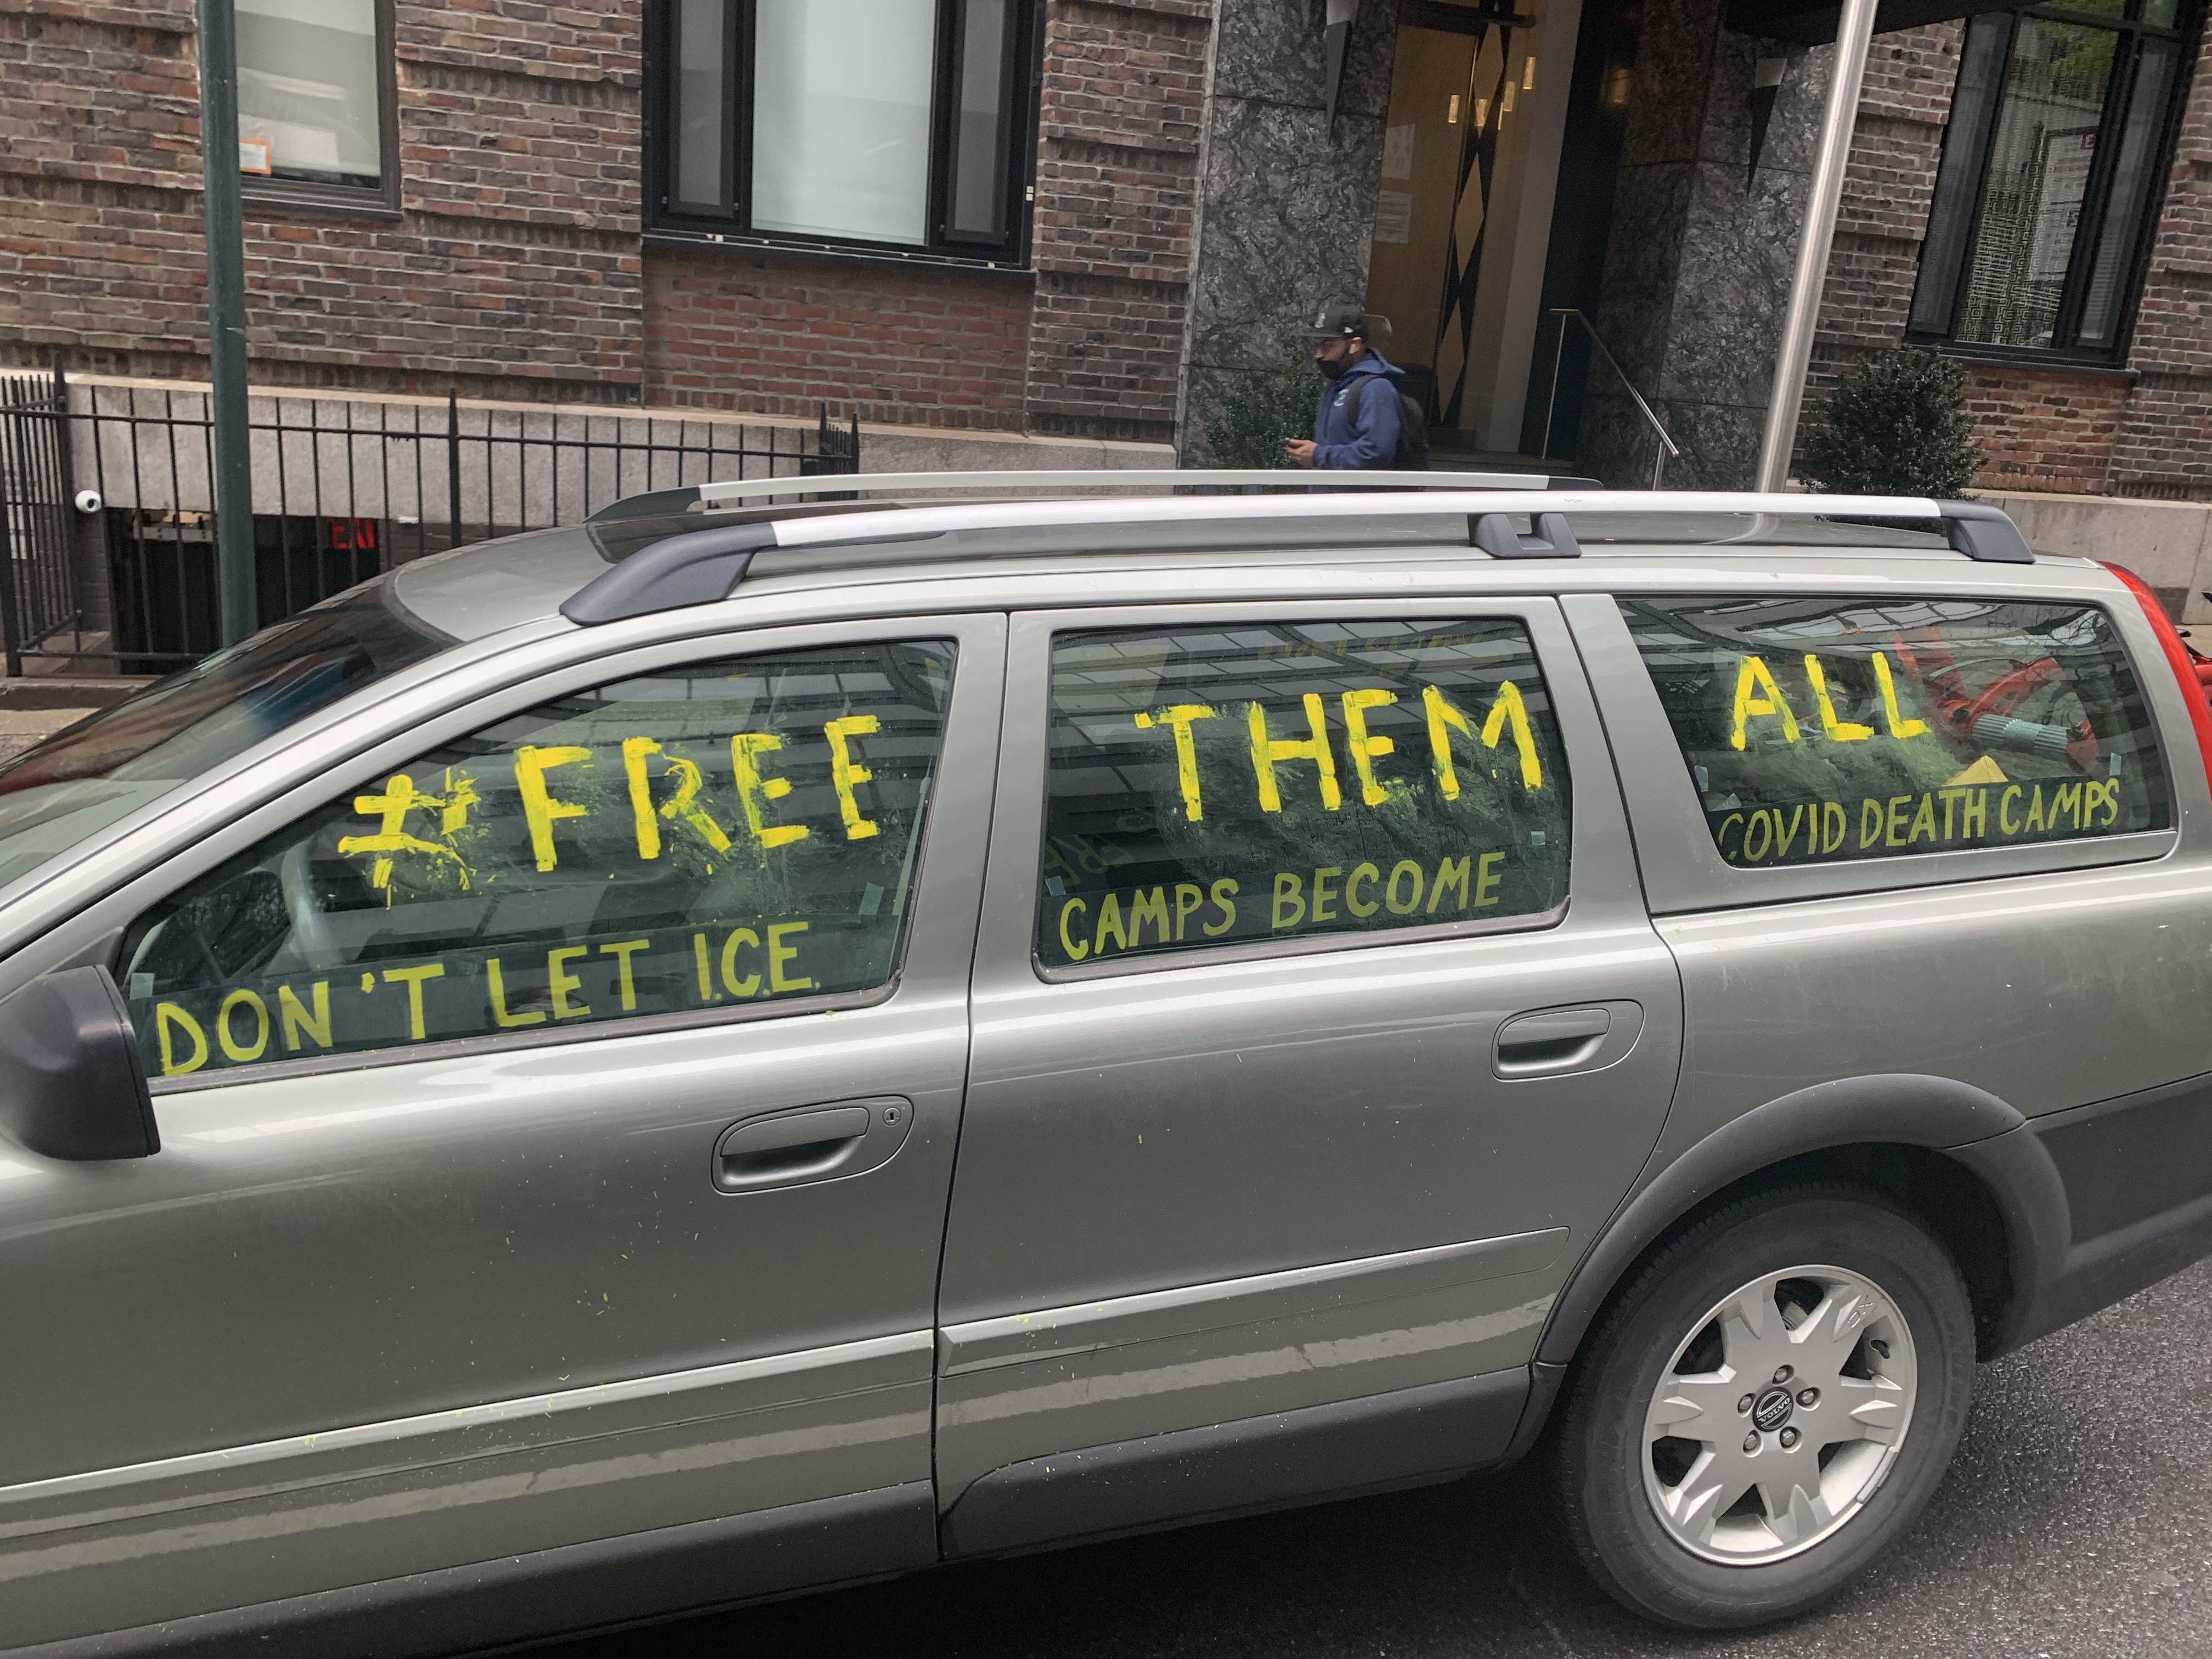 A grey station wagon is parked on the street. Words are painted across the windows in yellow: “#FREE THEM ALL. DON'T LET ICE CAMPS BECOME COVID DEATH CAMPS.”